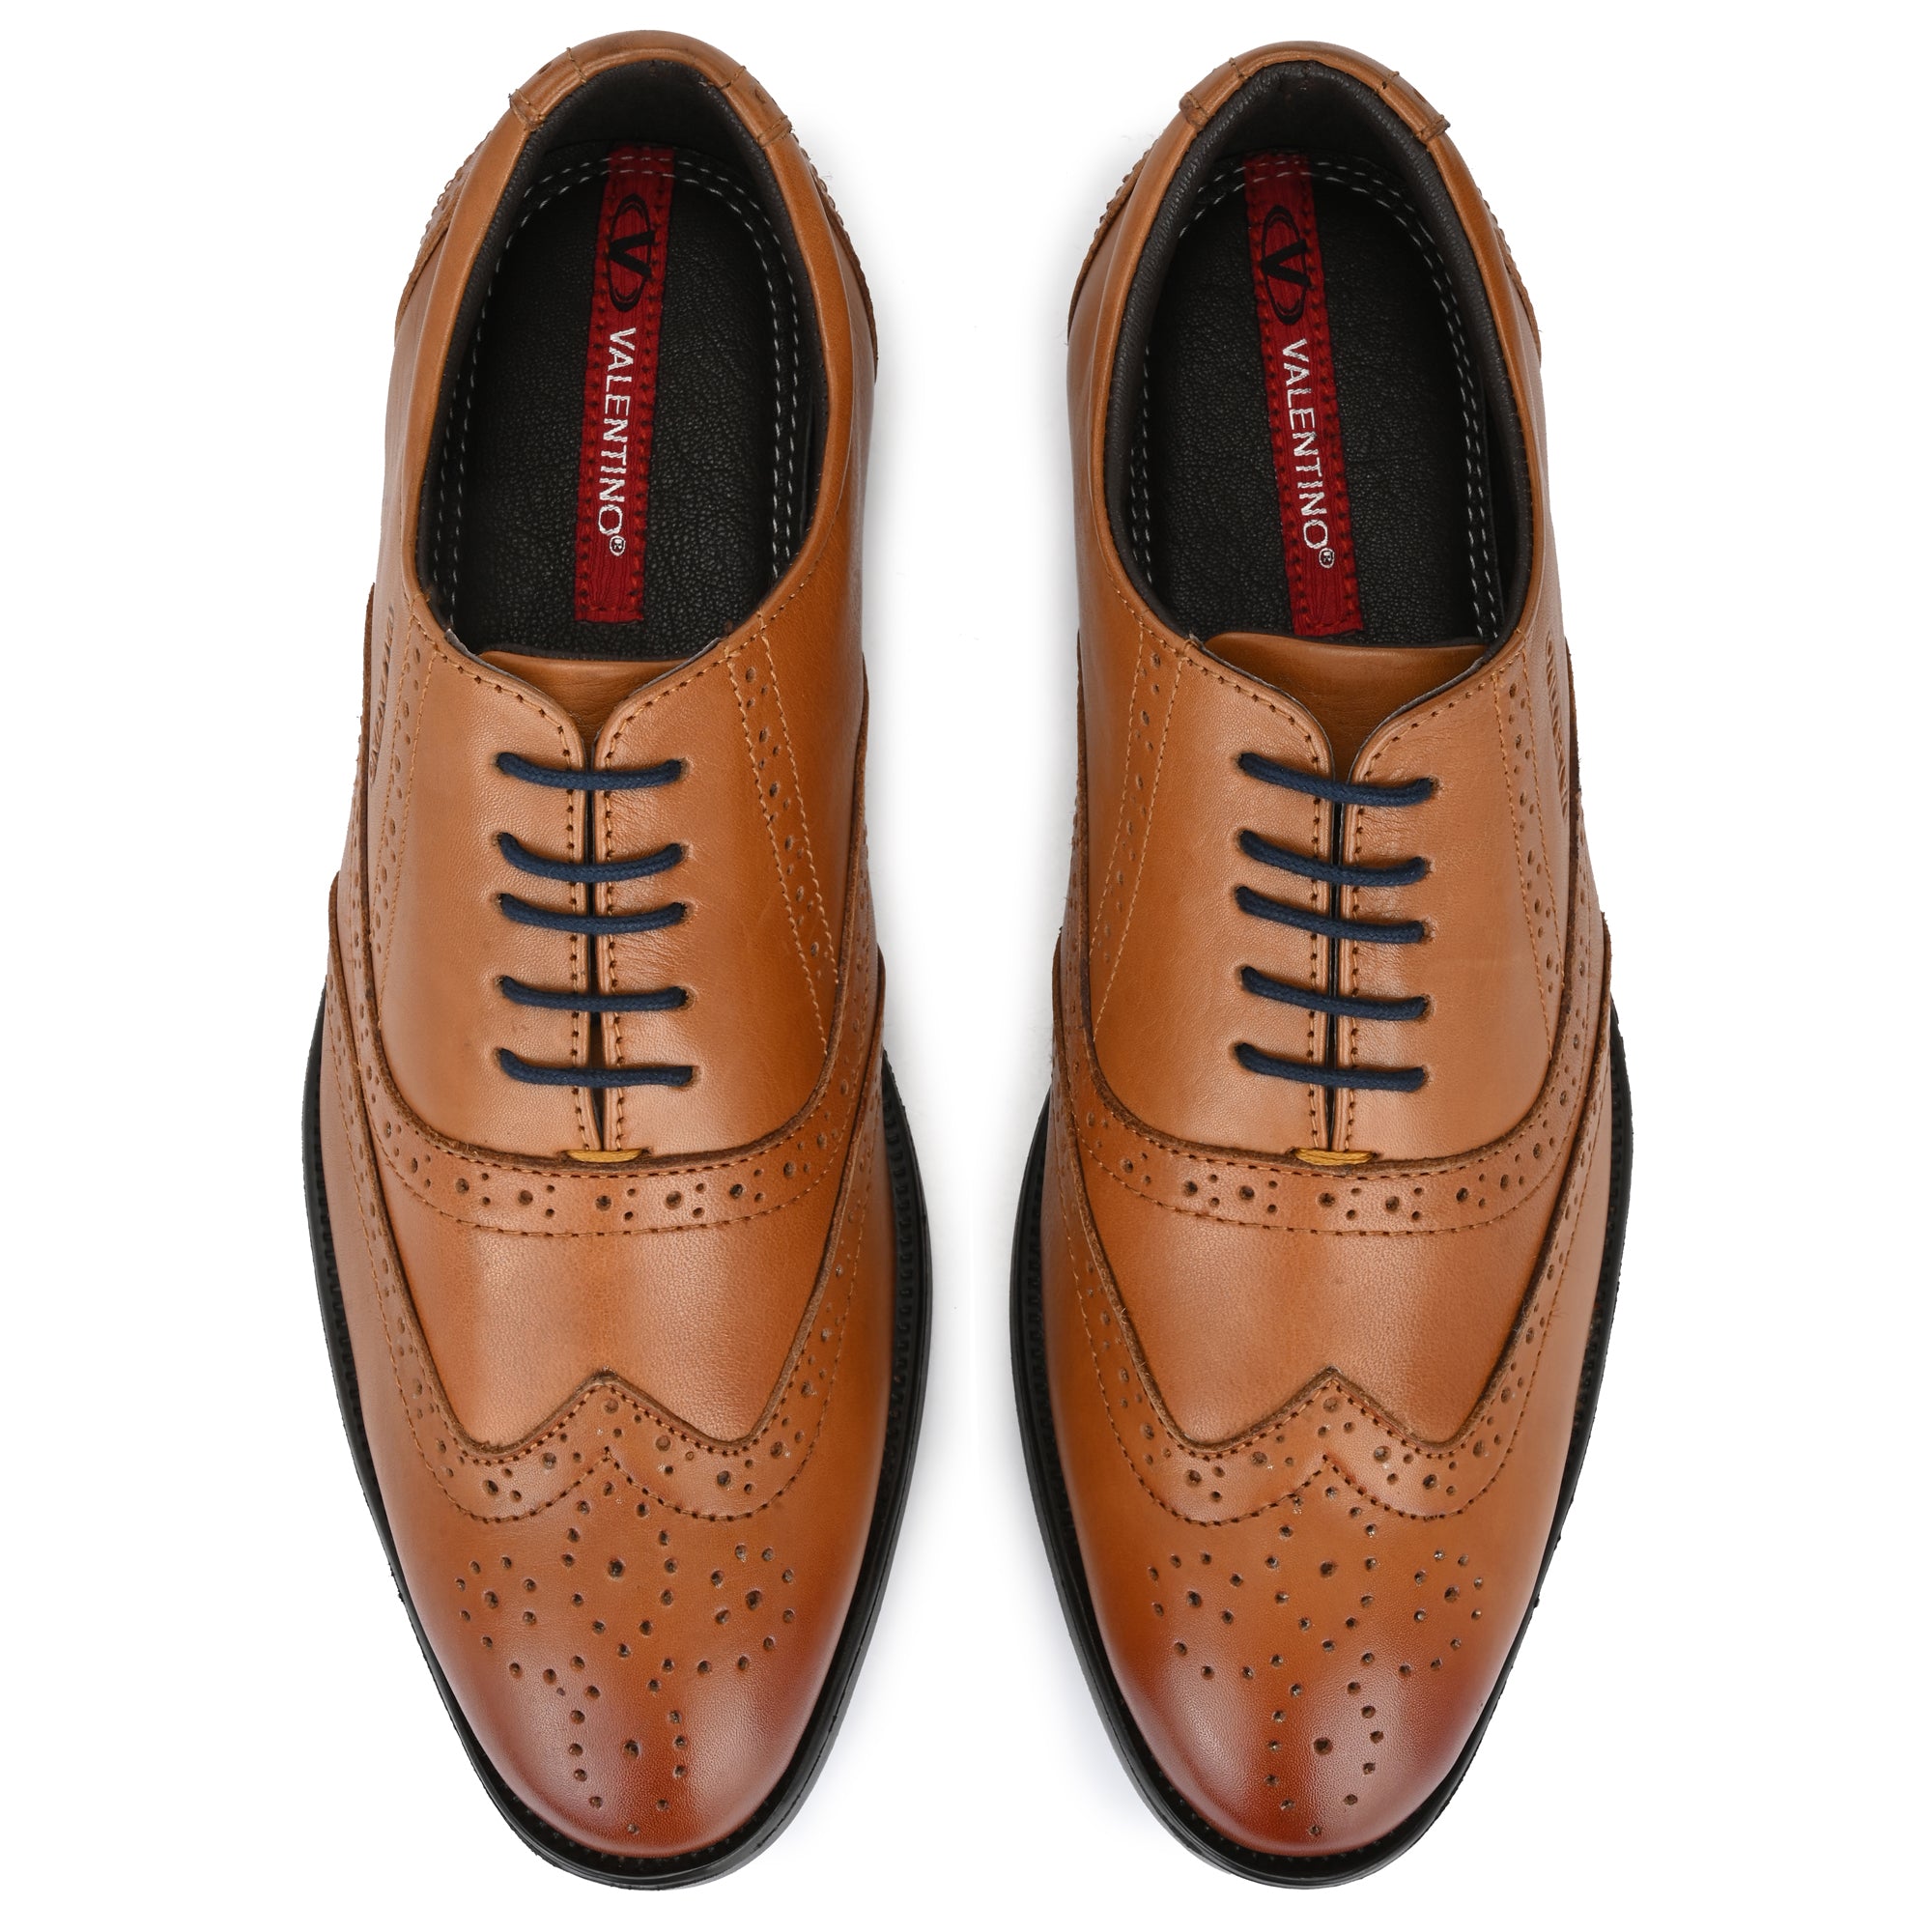 COSMO-70 MEN LEATHER TAN FORMAL LACE UP DERBY